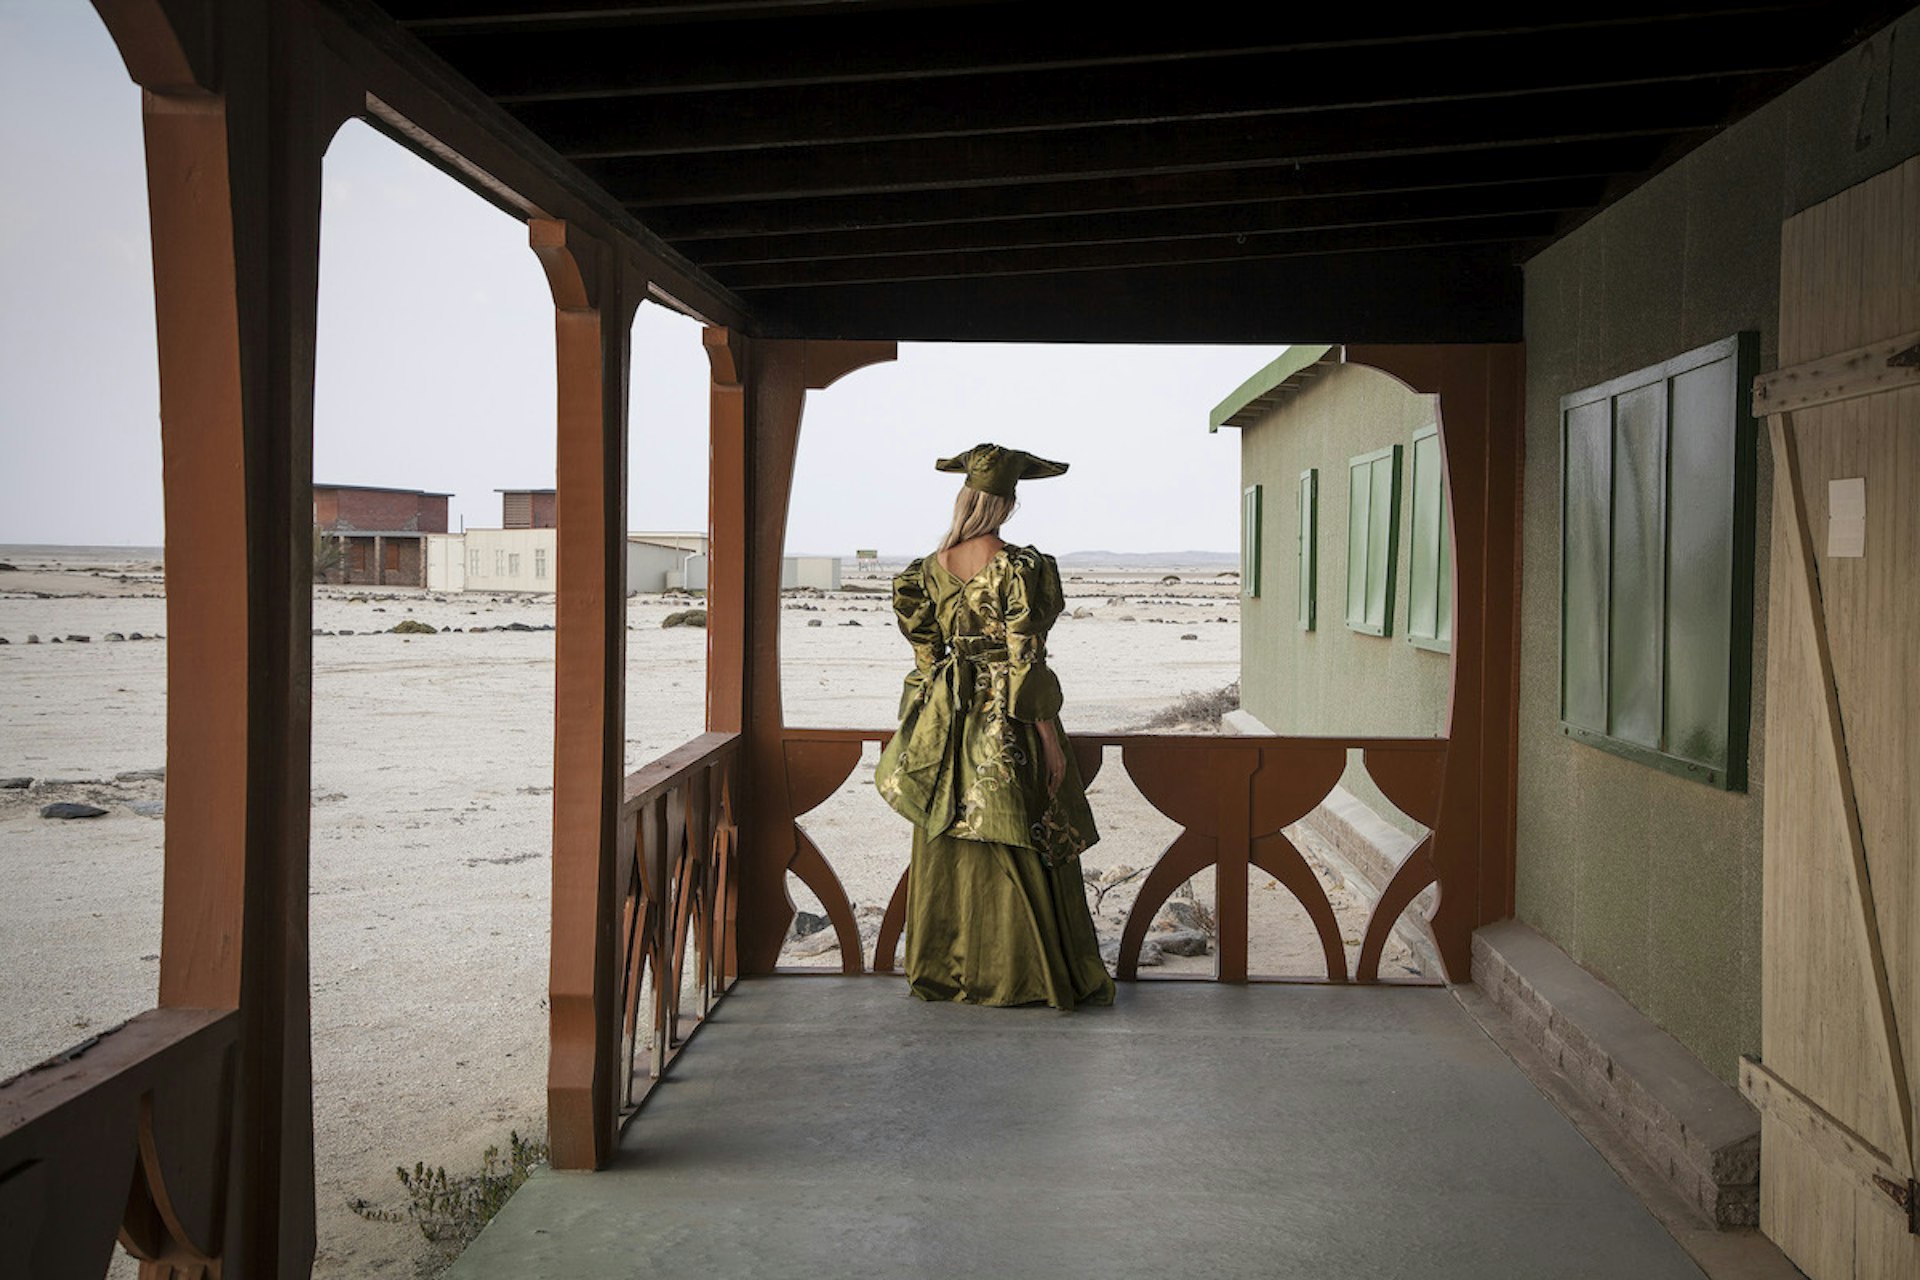 An unsettling visual trip through Namibia’s past